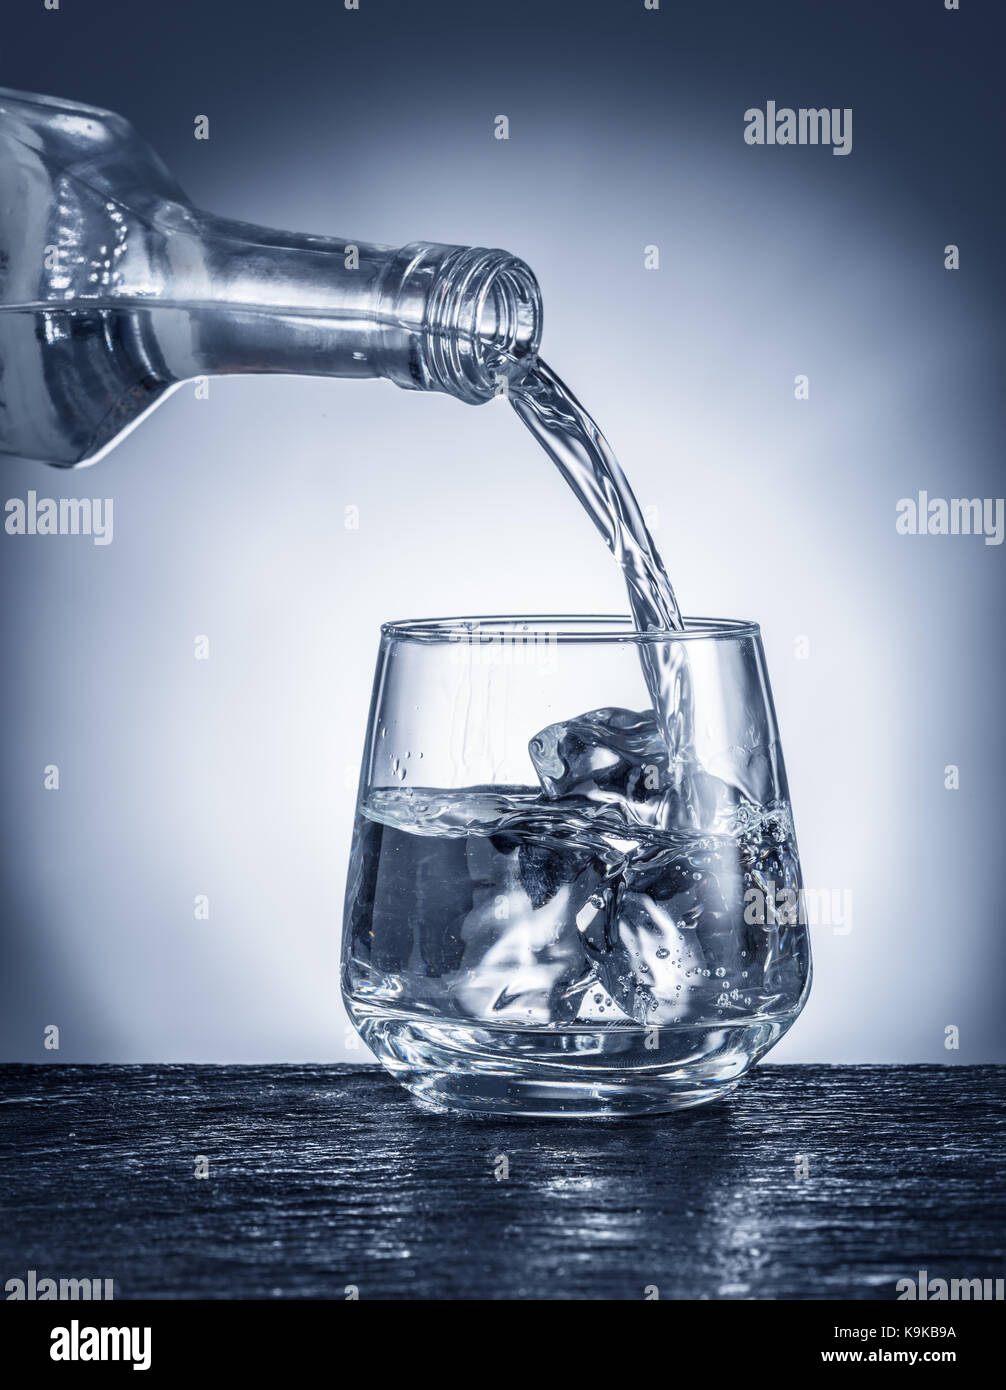 Pouring alcohol into a glass. Monochrome picture. Stock Photo